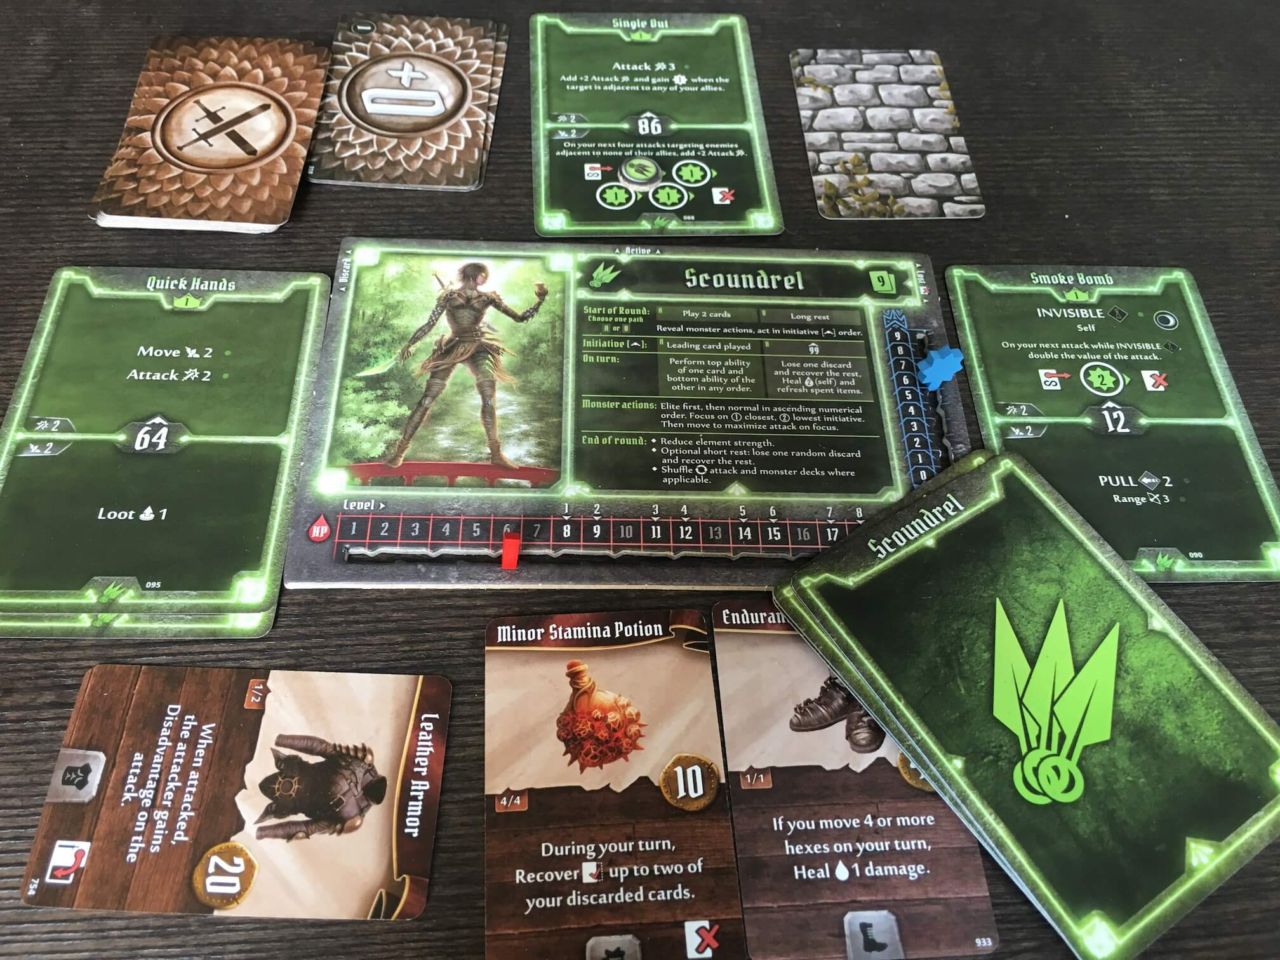 gloomhaven cards